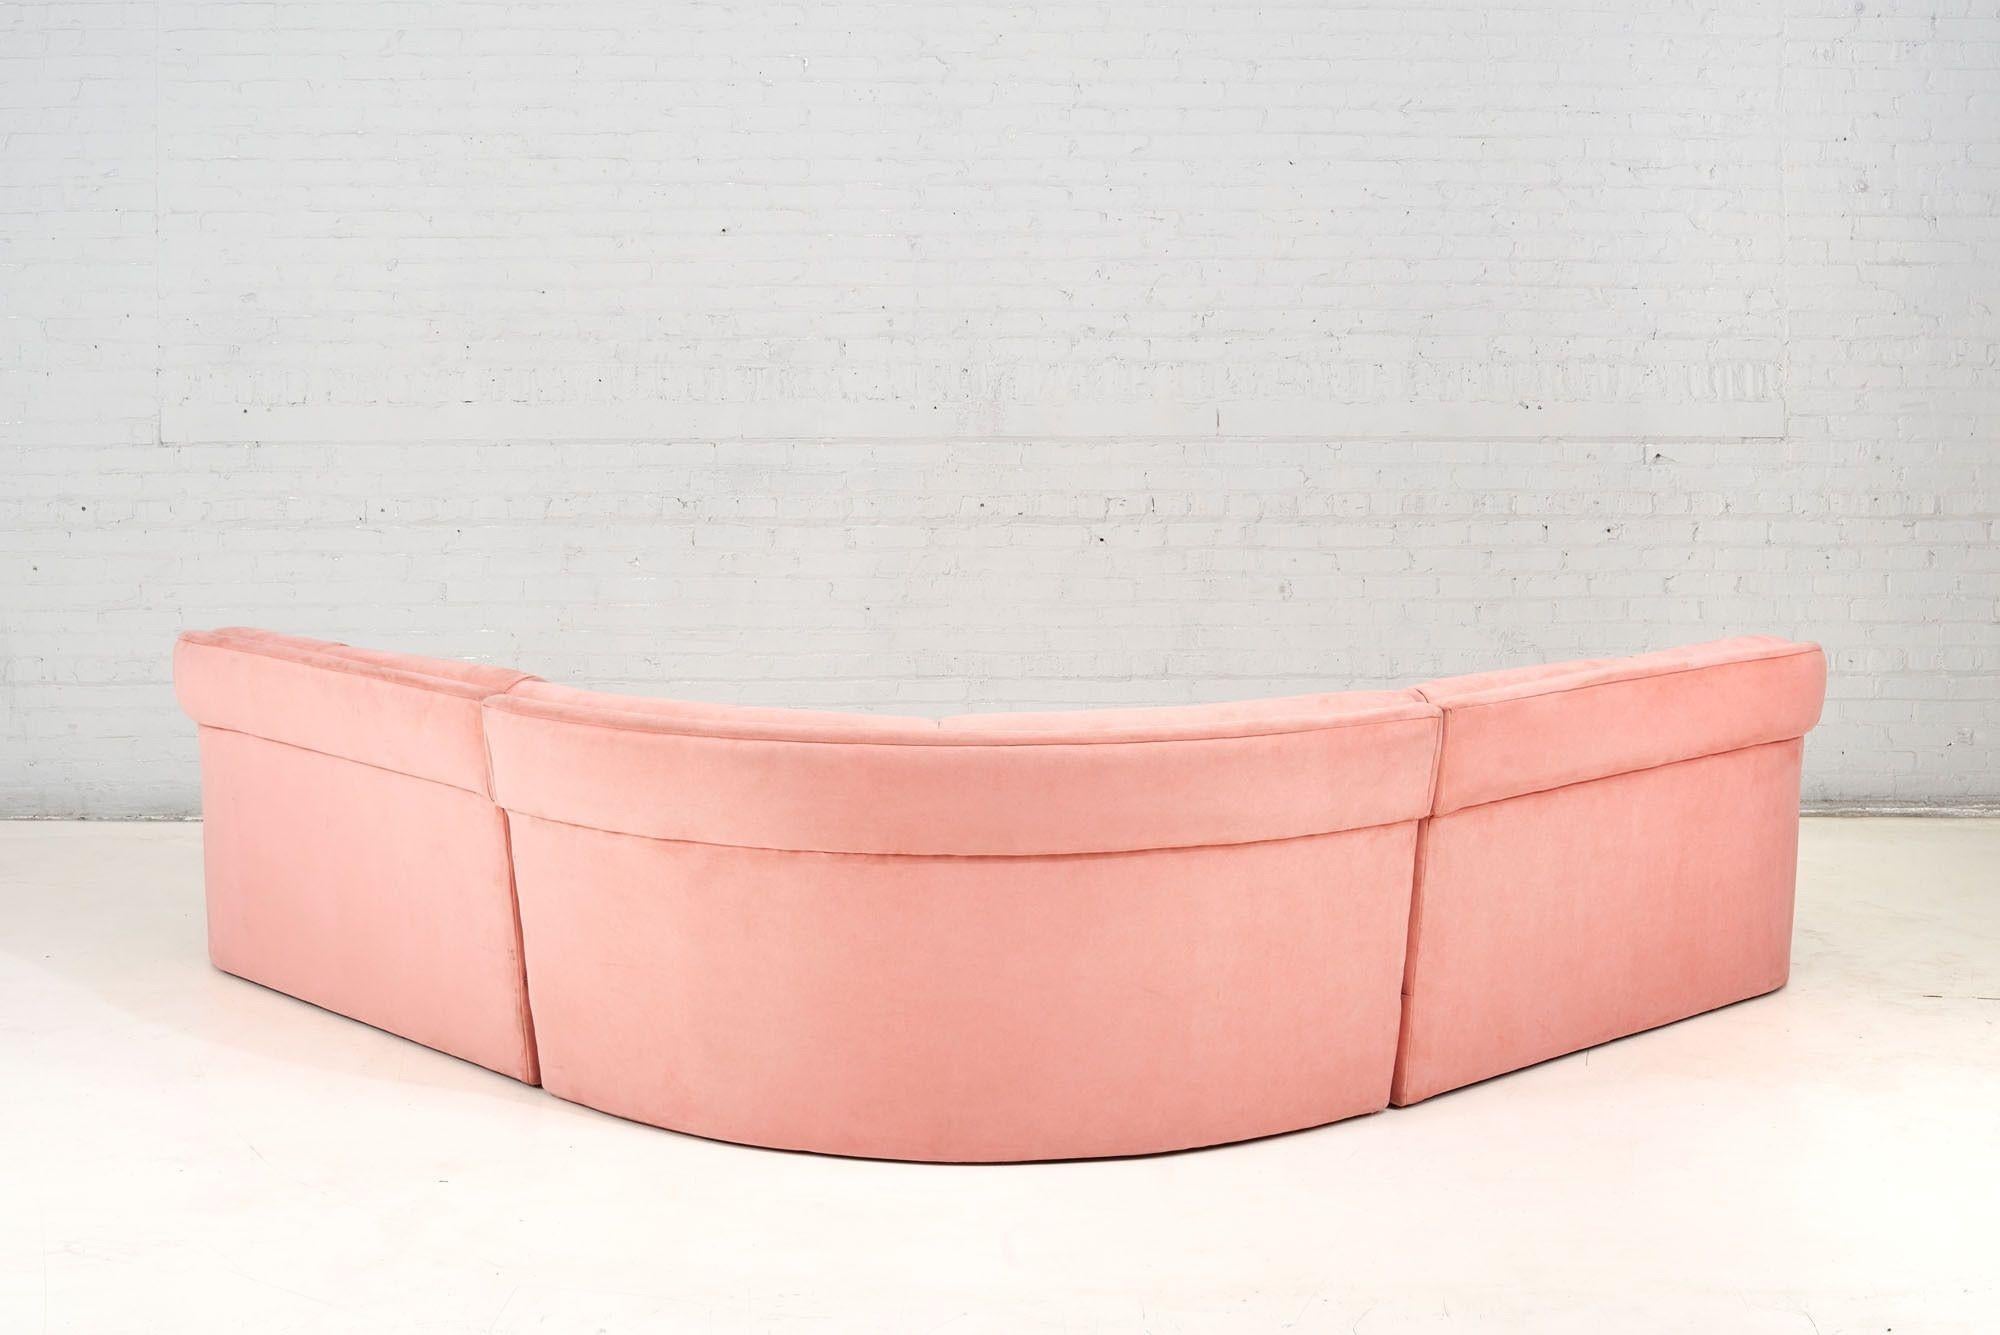 American Pink Postmodern Sectional Sofa, Style of Milo Baughman for Thayer-Coggin, 1980 For Sale